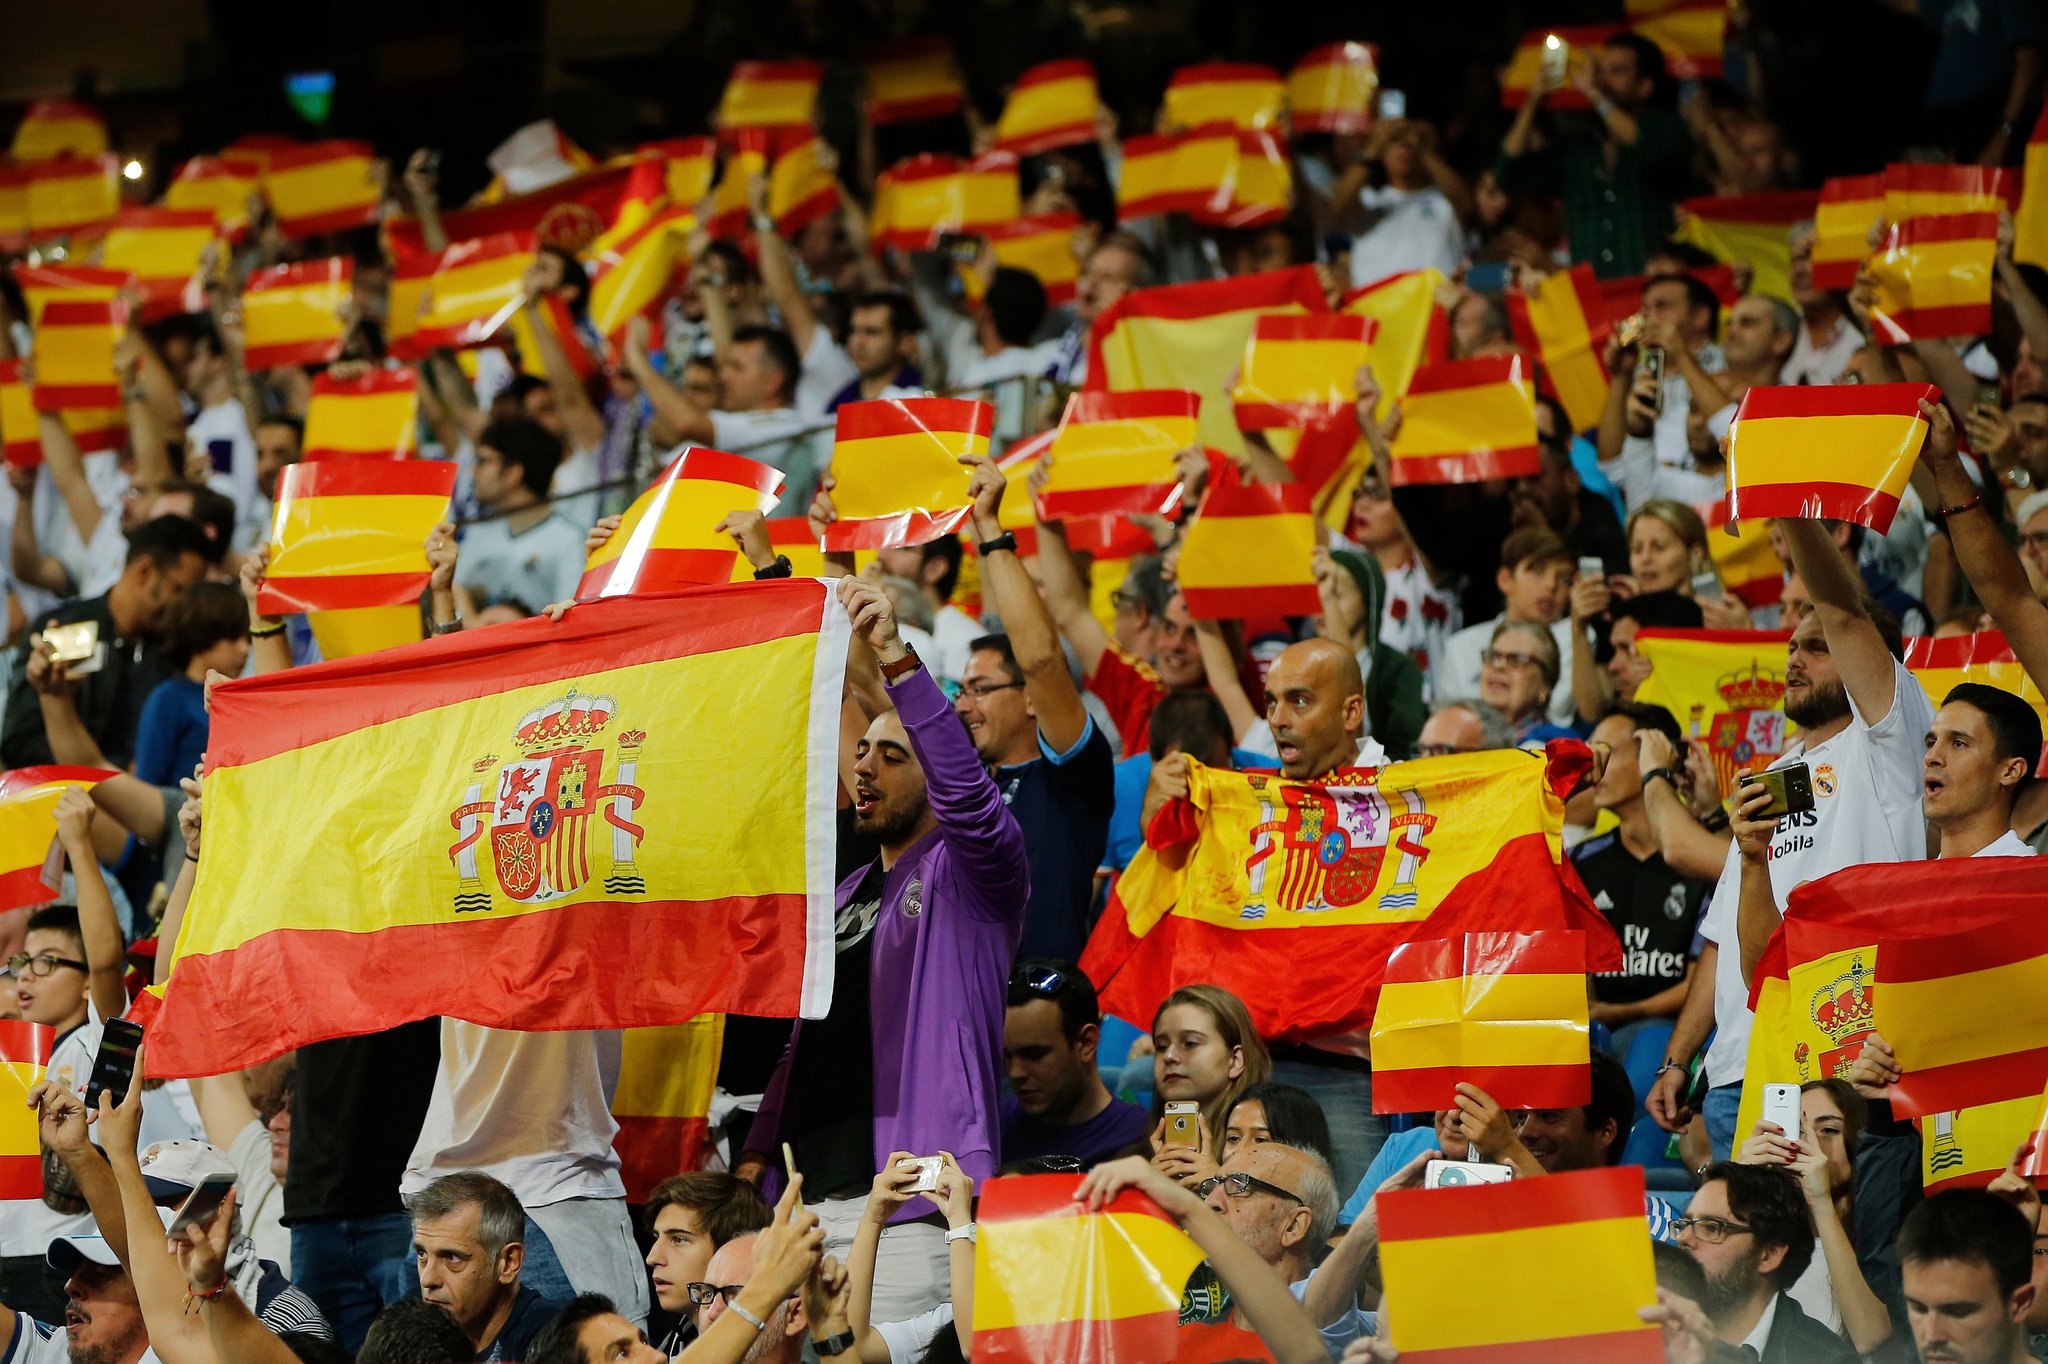 Soccer fans made their sentiments known Sunday as they waved the Spanish flag at a soccer game in Madrid. Credit Paul White/Associated Press